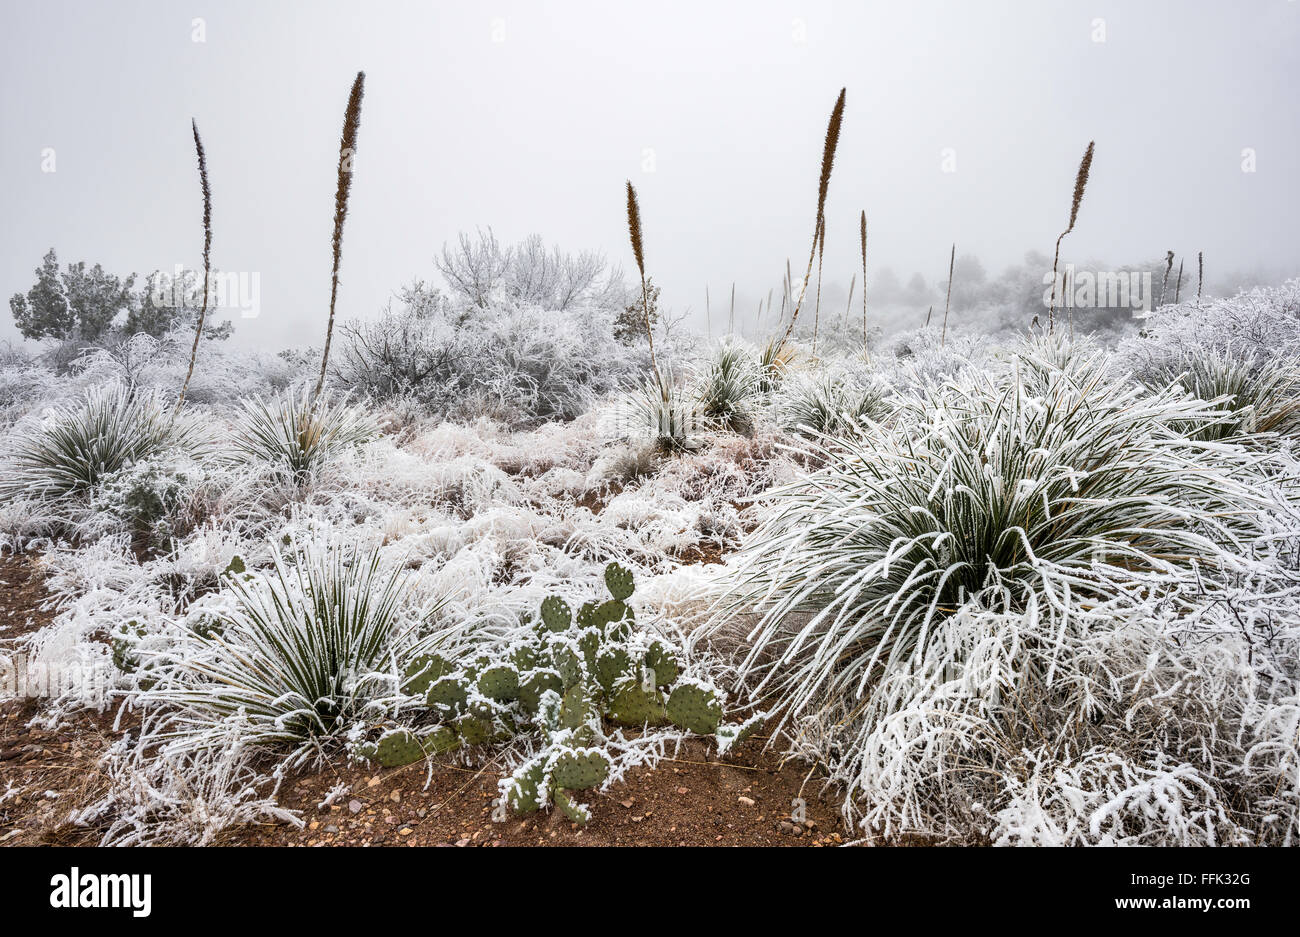 Frozen fog aka atmospheric icing on prickly pear cacti and sotol plants, Chihuahuan Desert, Big Bend National Park, Texas, USA Stock Photo